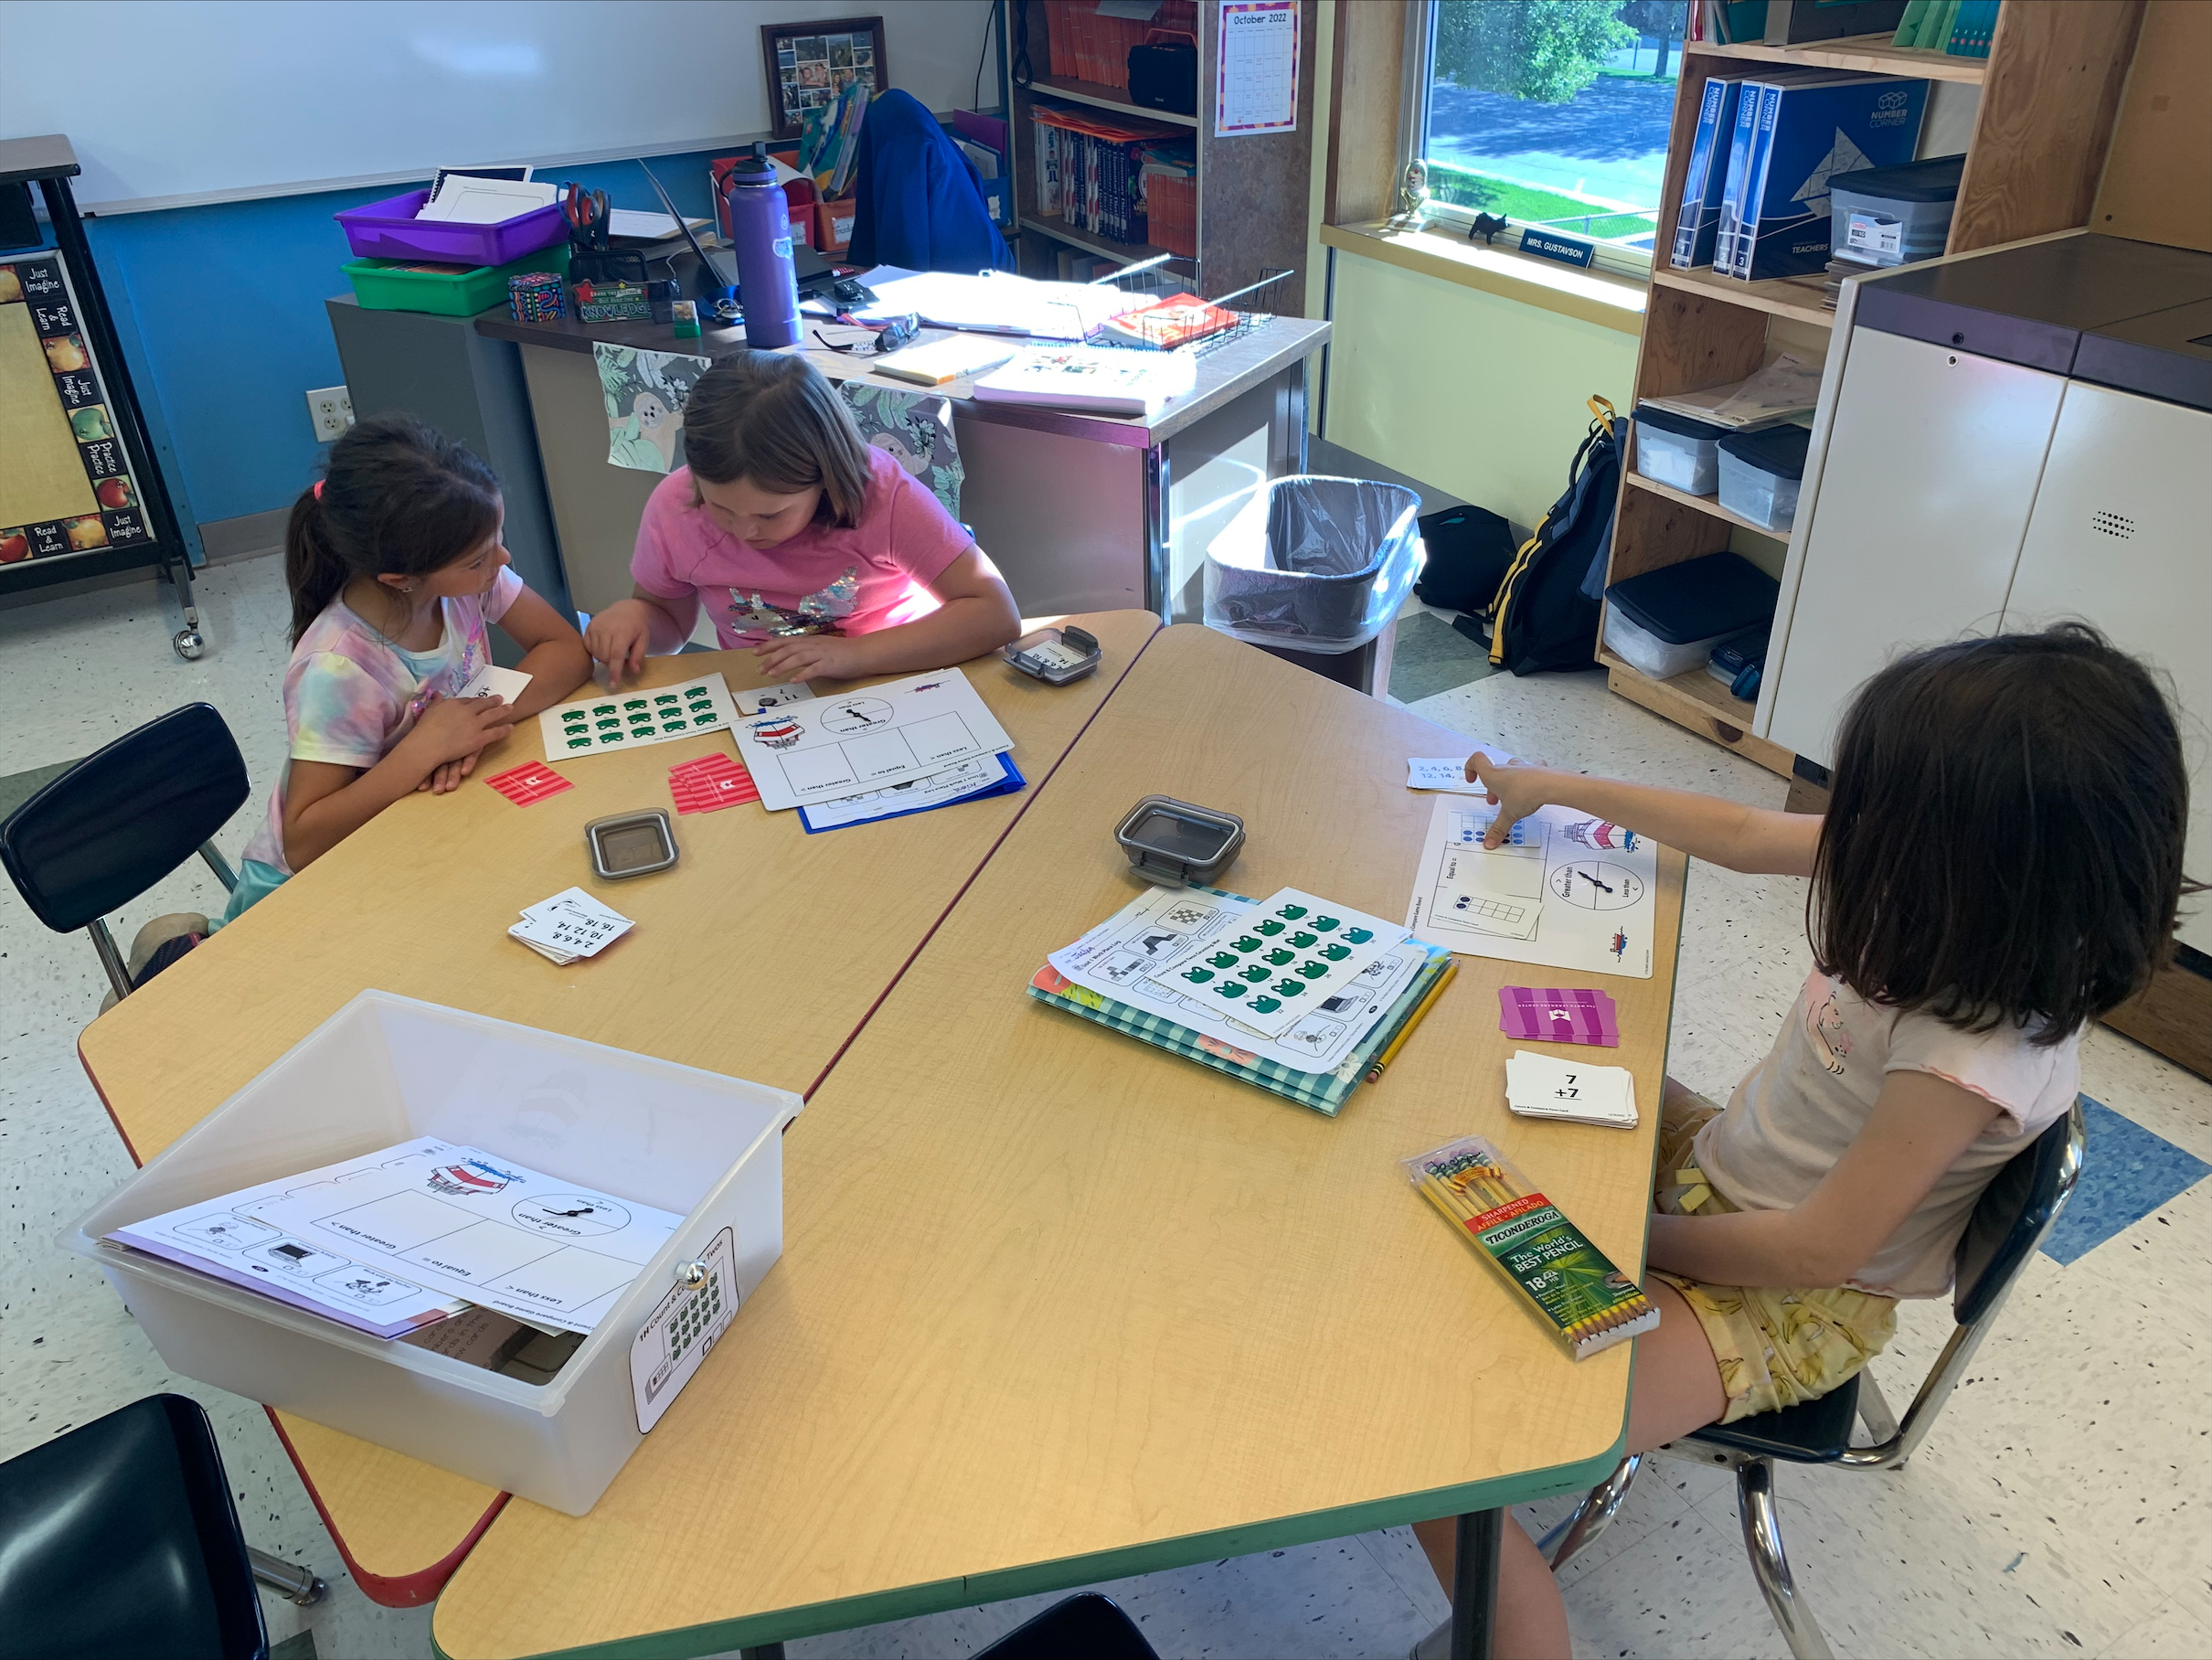 Two elementary students sit at one end of a table playing a math game. On the other side of the table is another student doing an individual math activity.